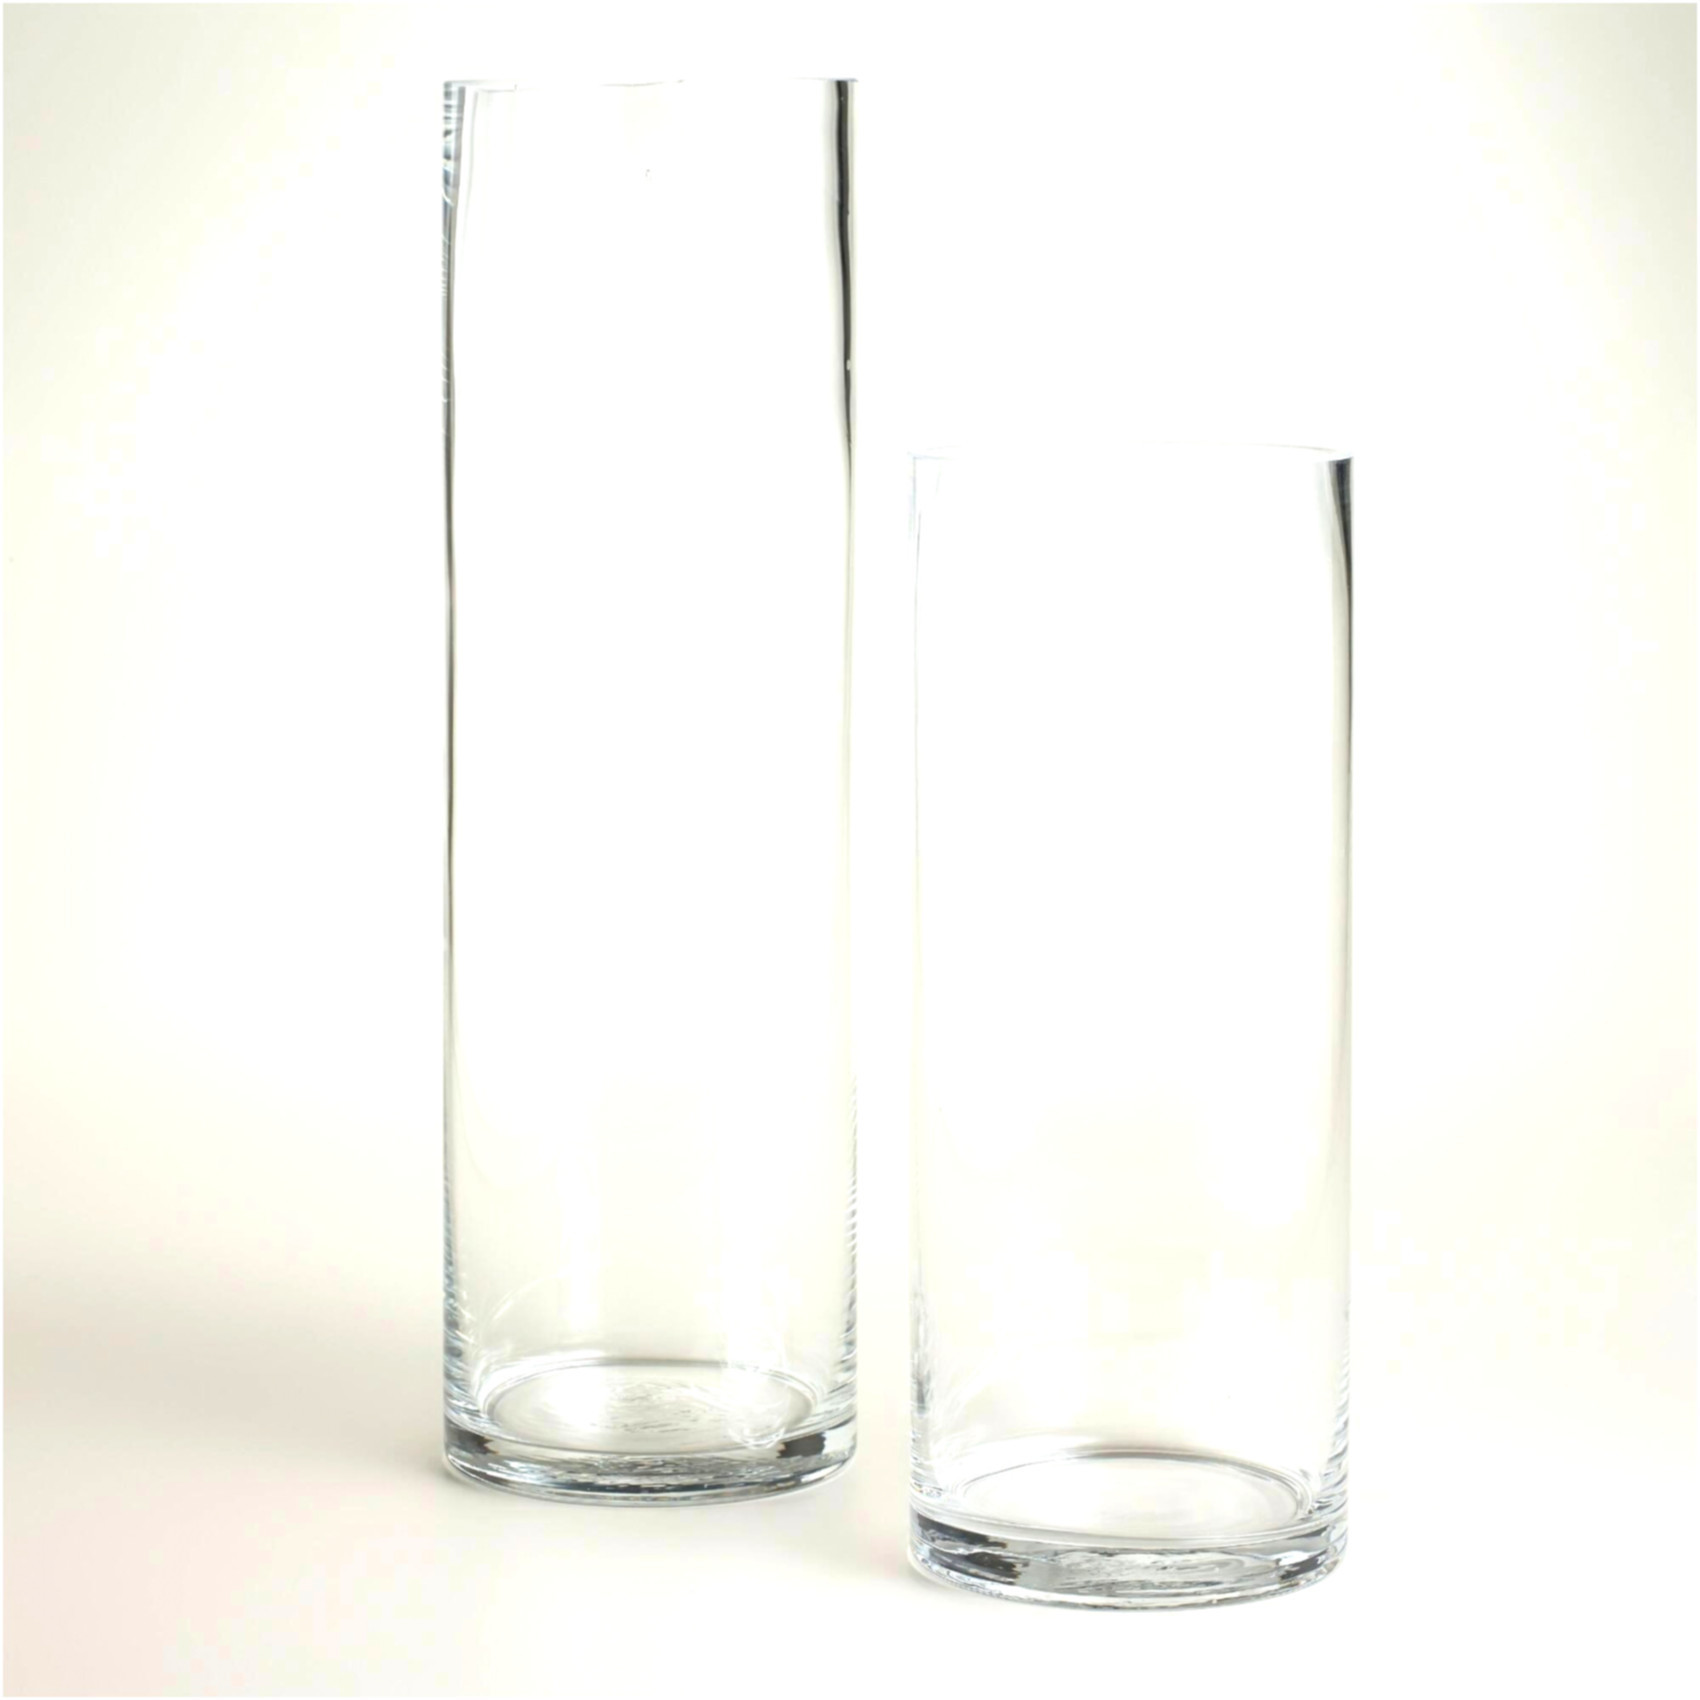 20 Wonderful Clear Glass Cube Vase 2024 free download clear glass cube vase of why you should not go to glass vases wholesale glass vases throughout crystal glass vases wholesale inspirational 30 elegant vases with